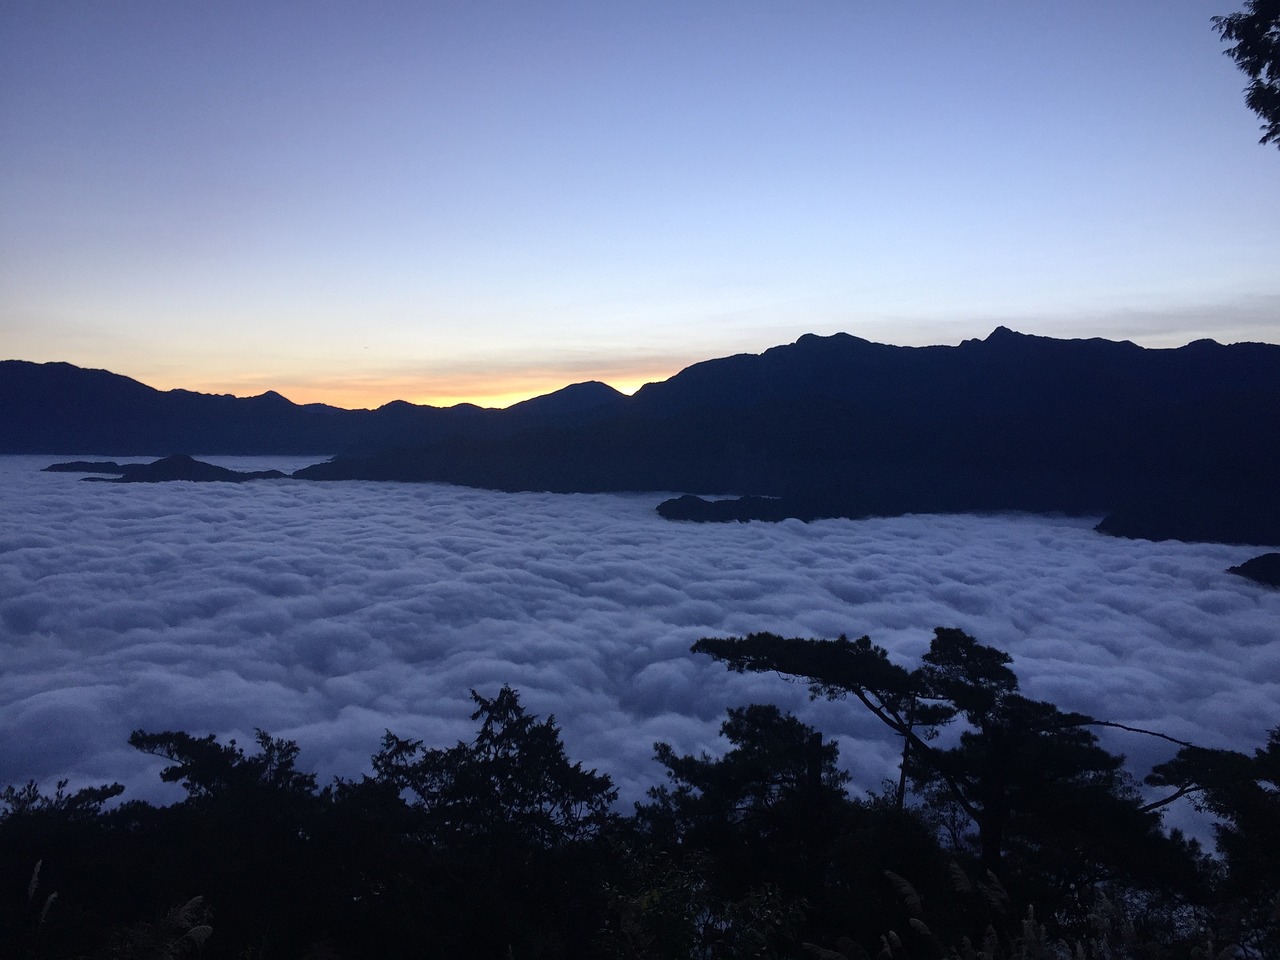 3 Days of Scenic Beauty in Alishan